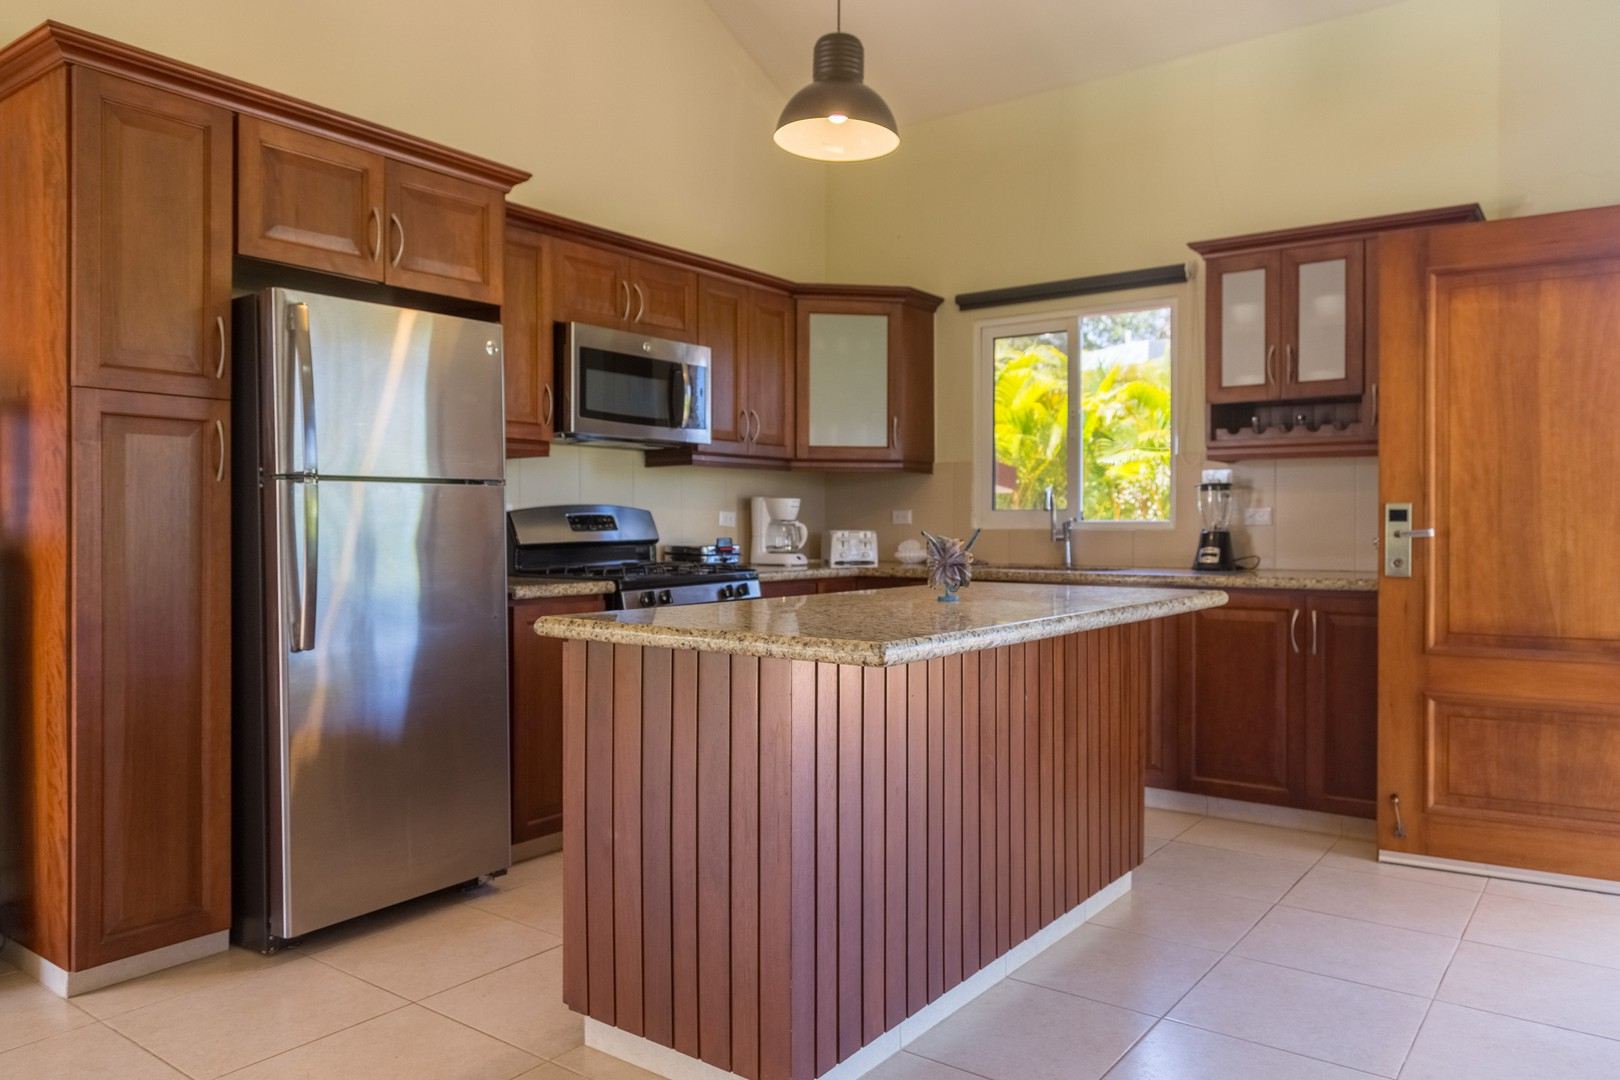 The villa kitchen in fine wood and stainless steel appliances